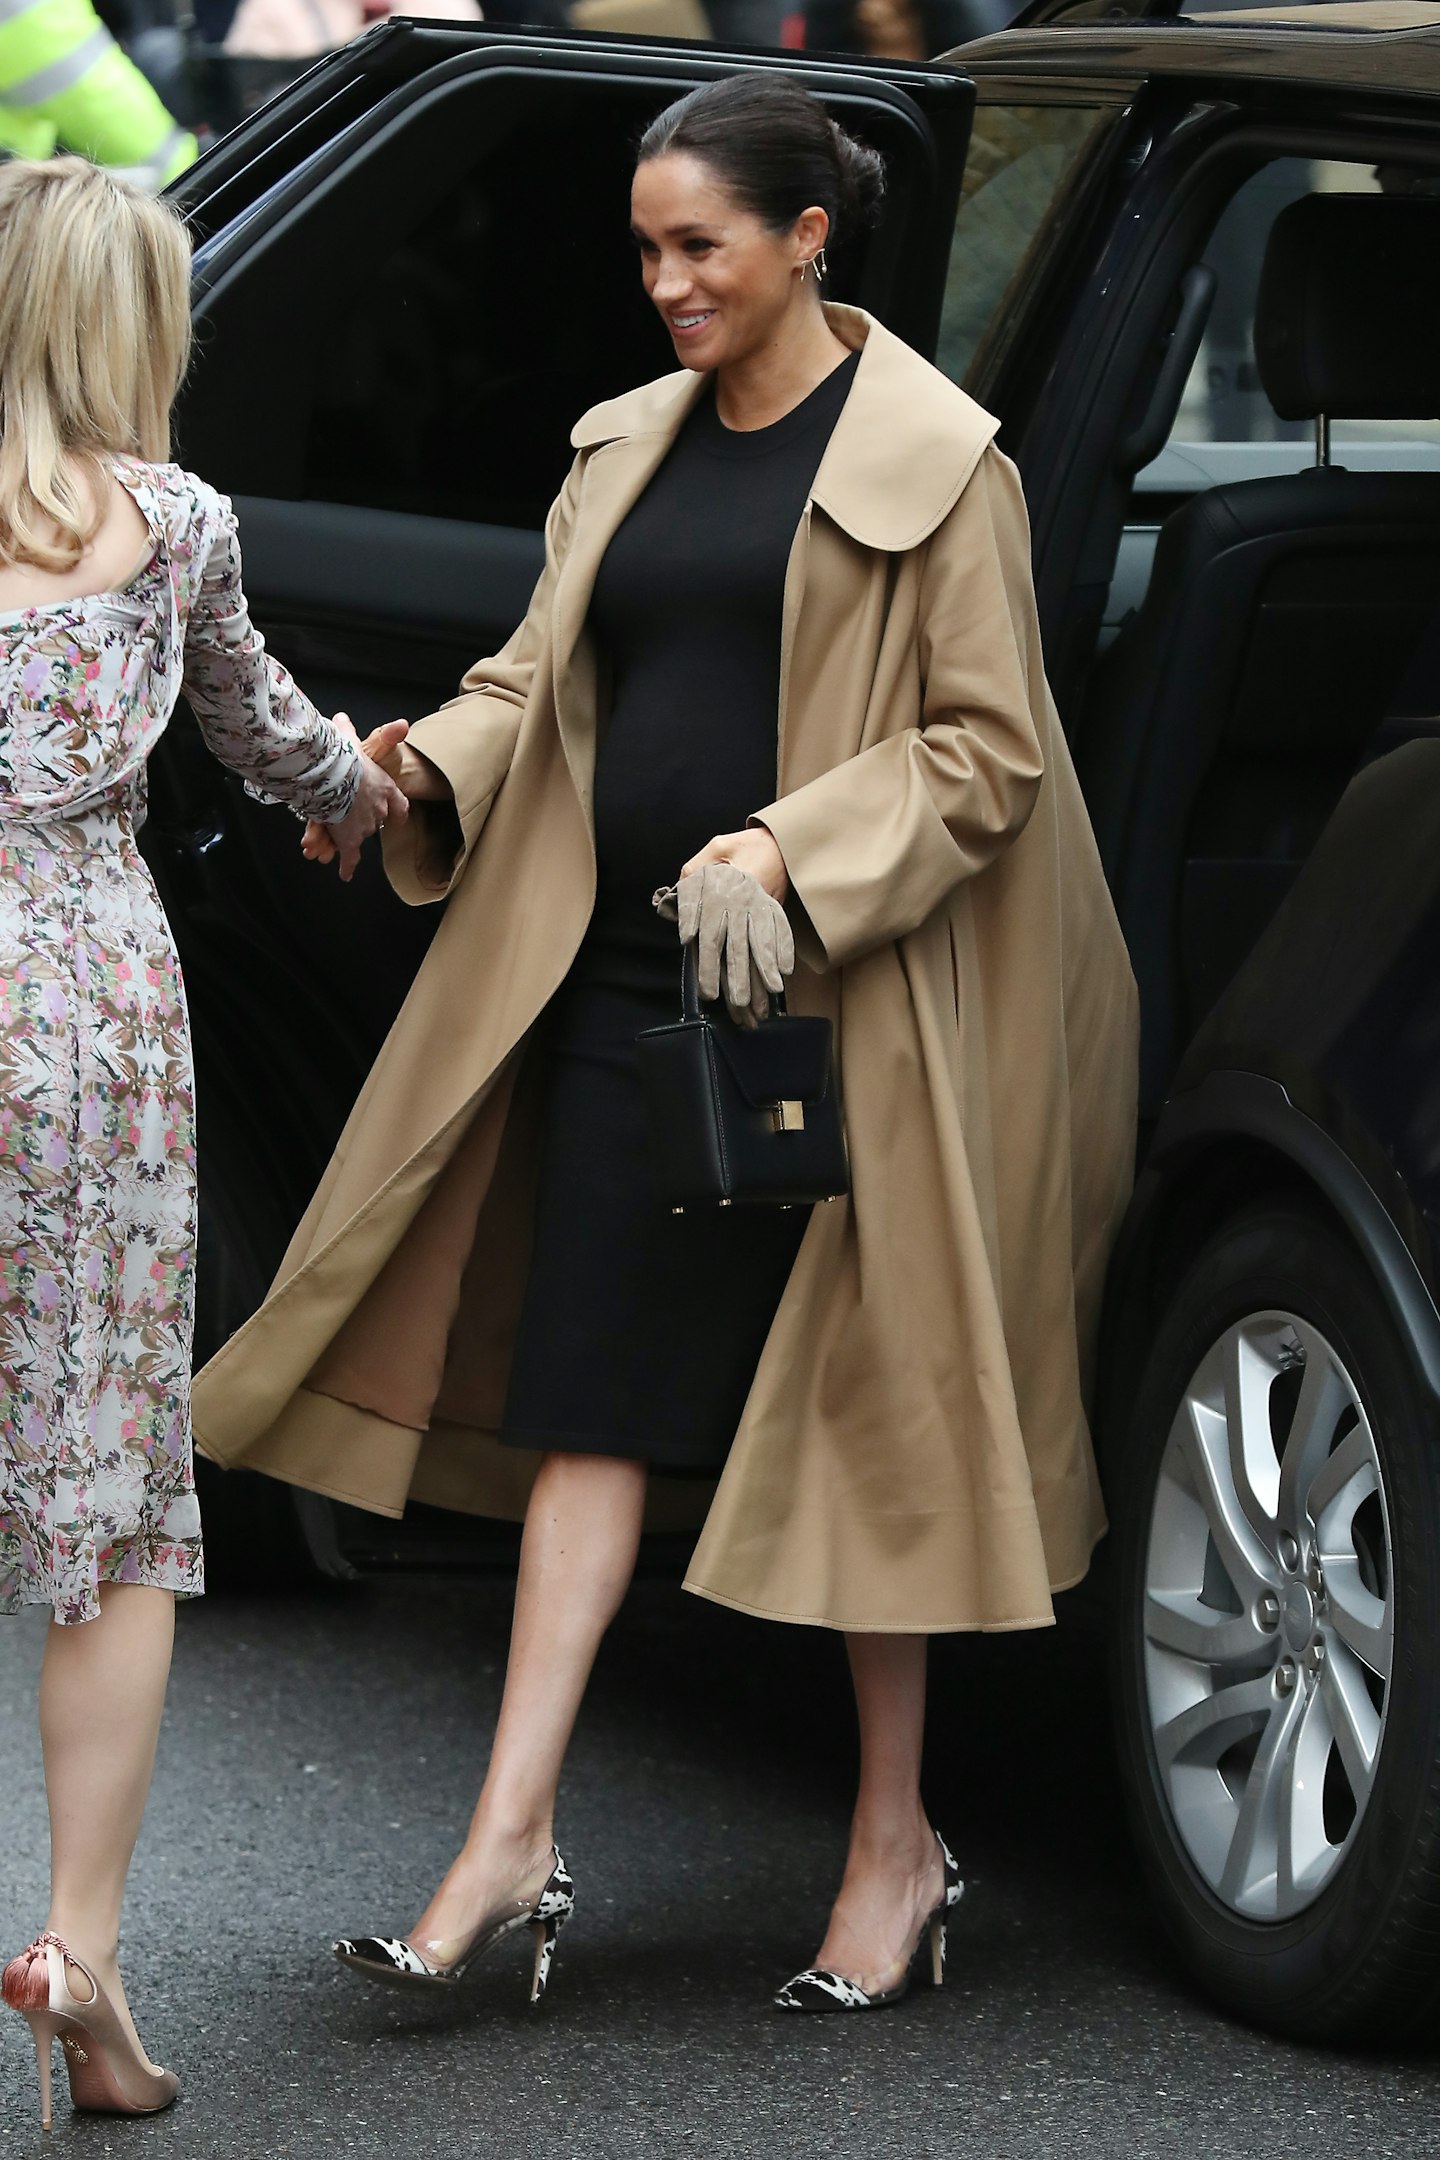 The Duchess Of Sussex looked sensational in earthy tones on her recent visit to Smart Works